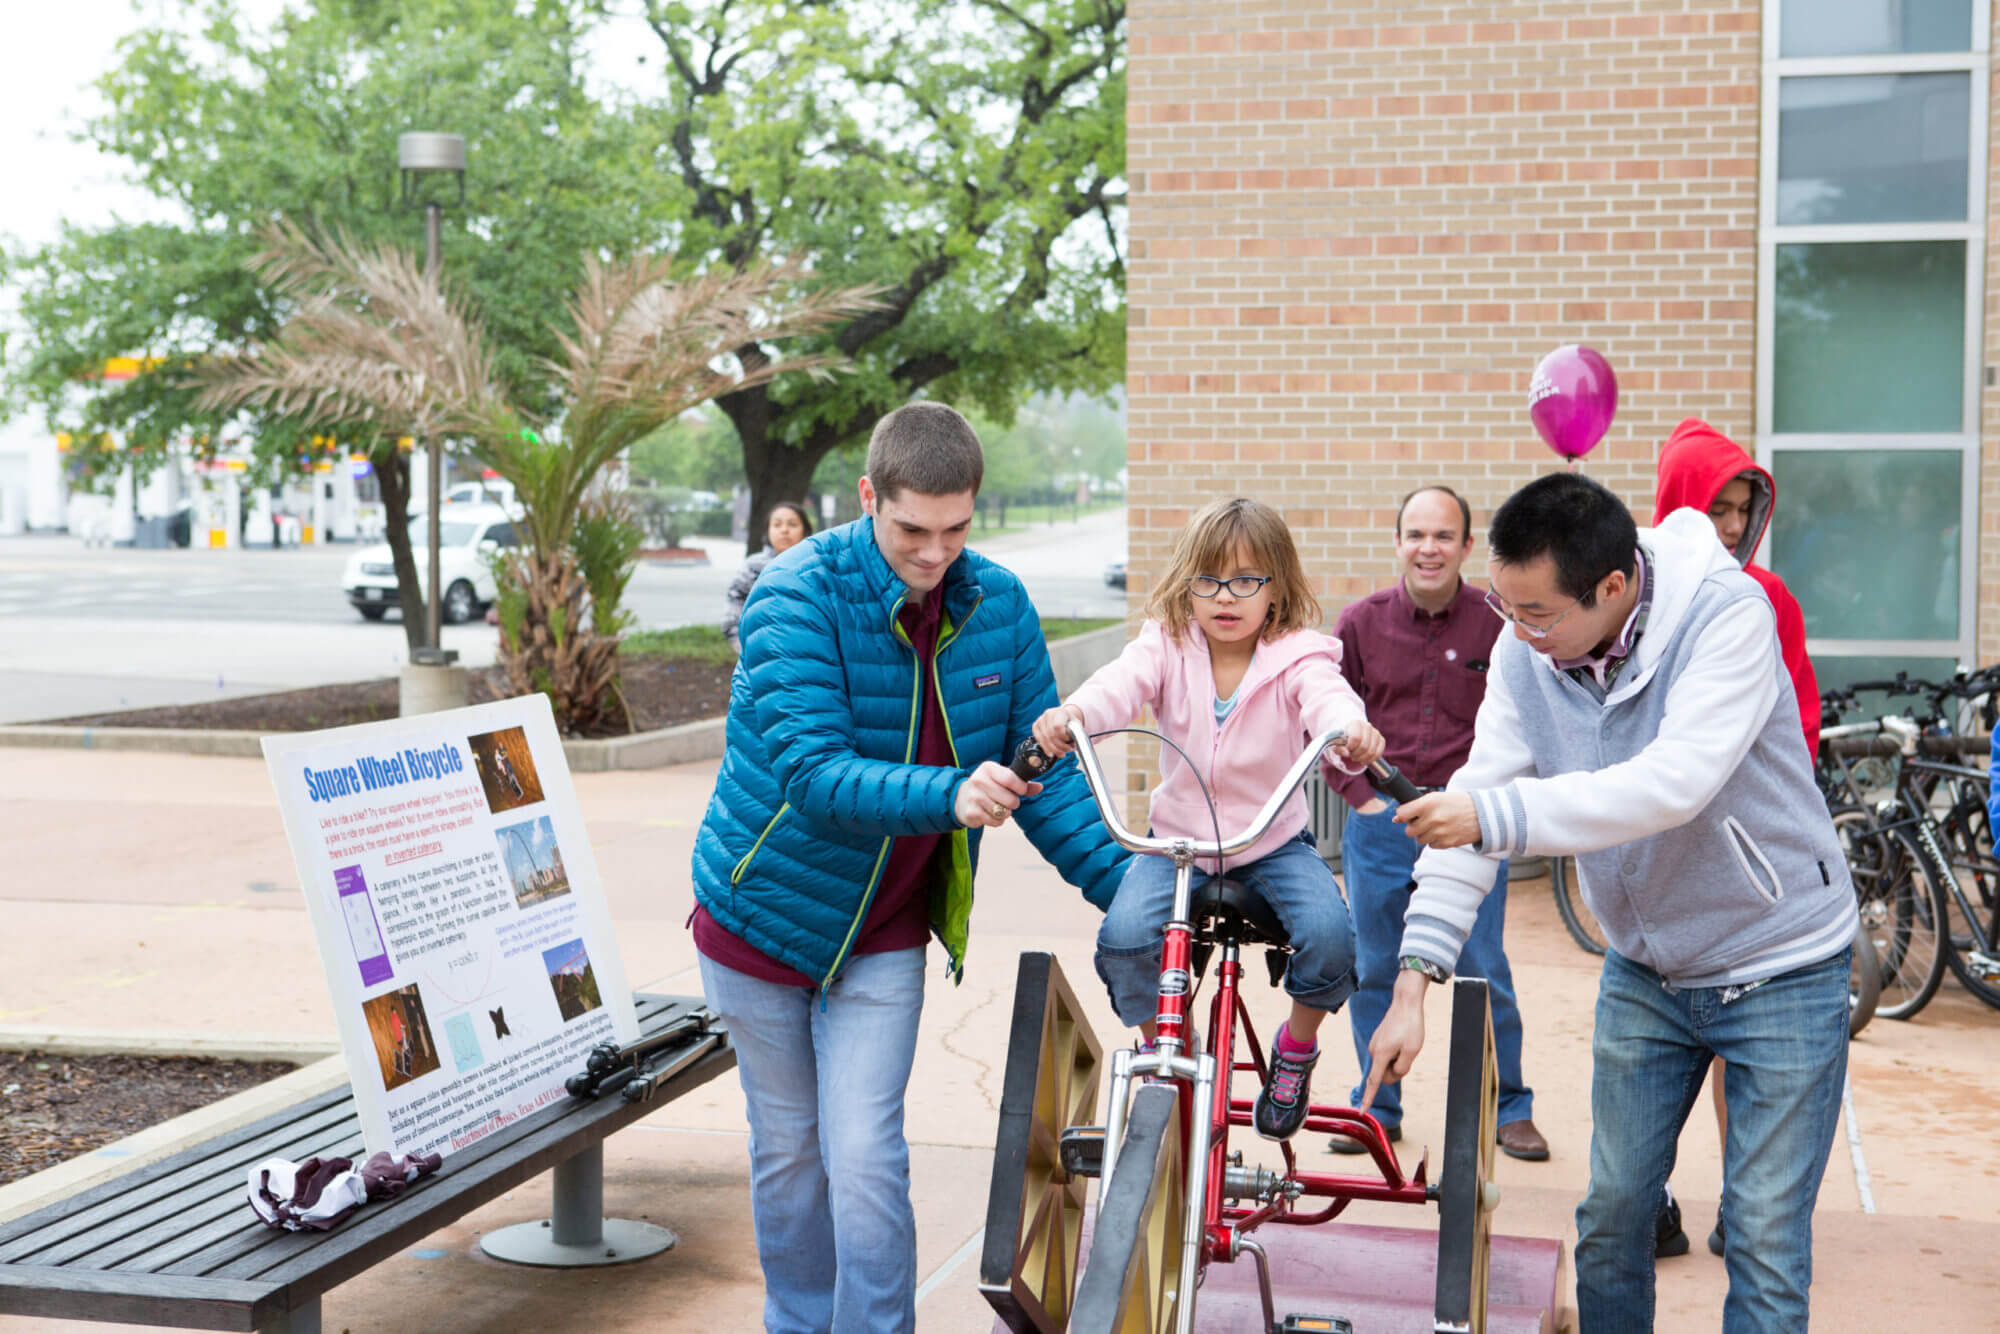 How does a square-wheeled tricycle ride smoothly? Adjust it’s terrain!